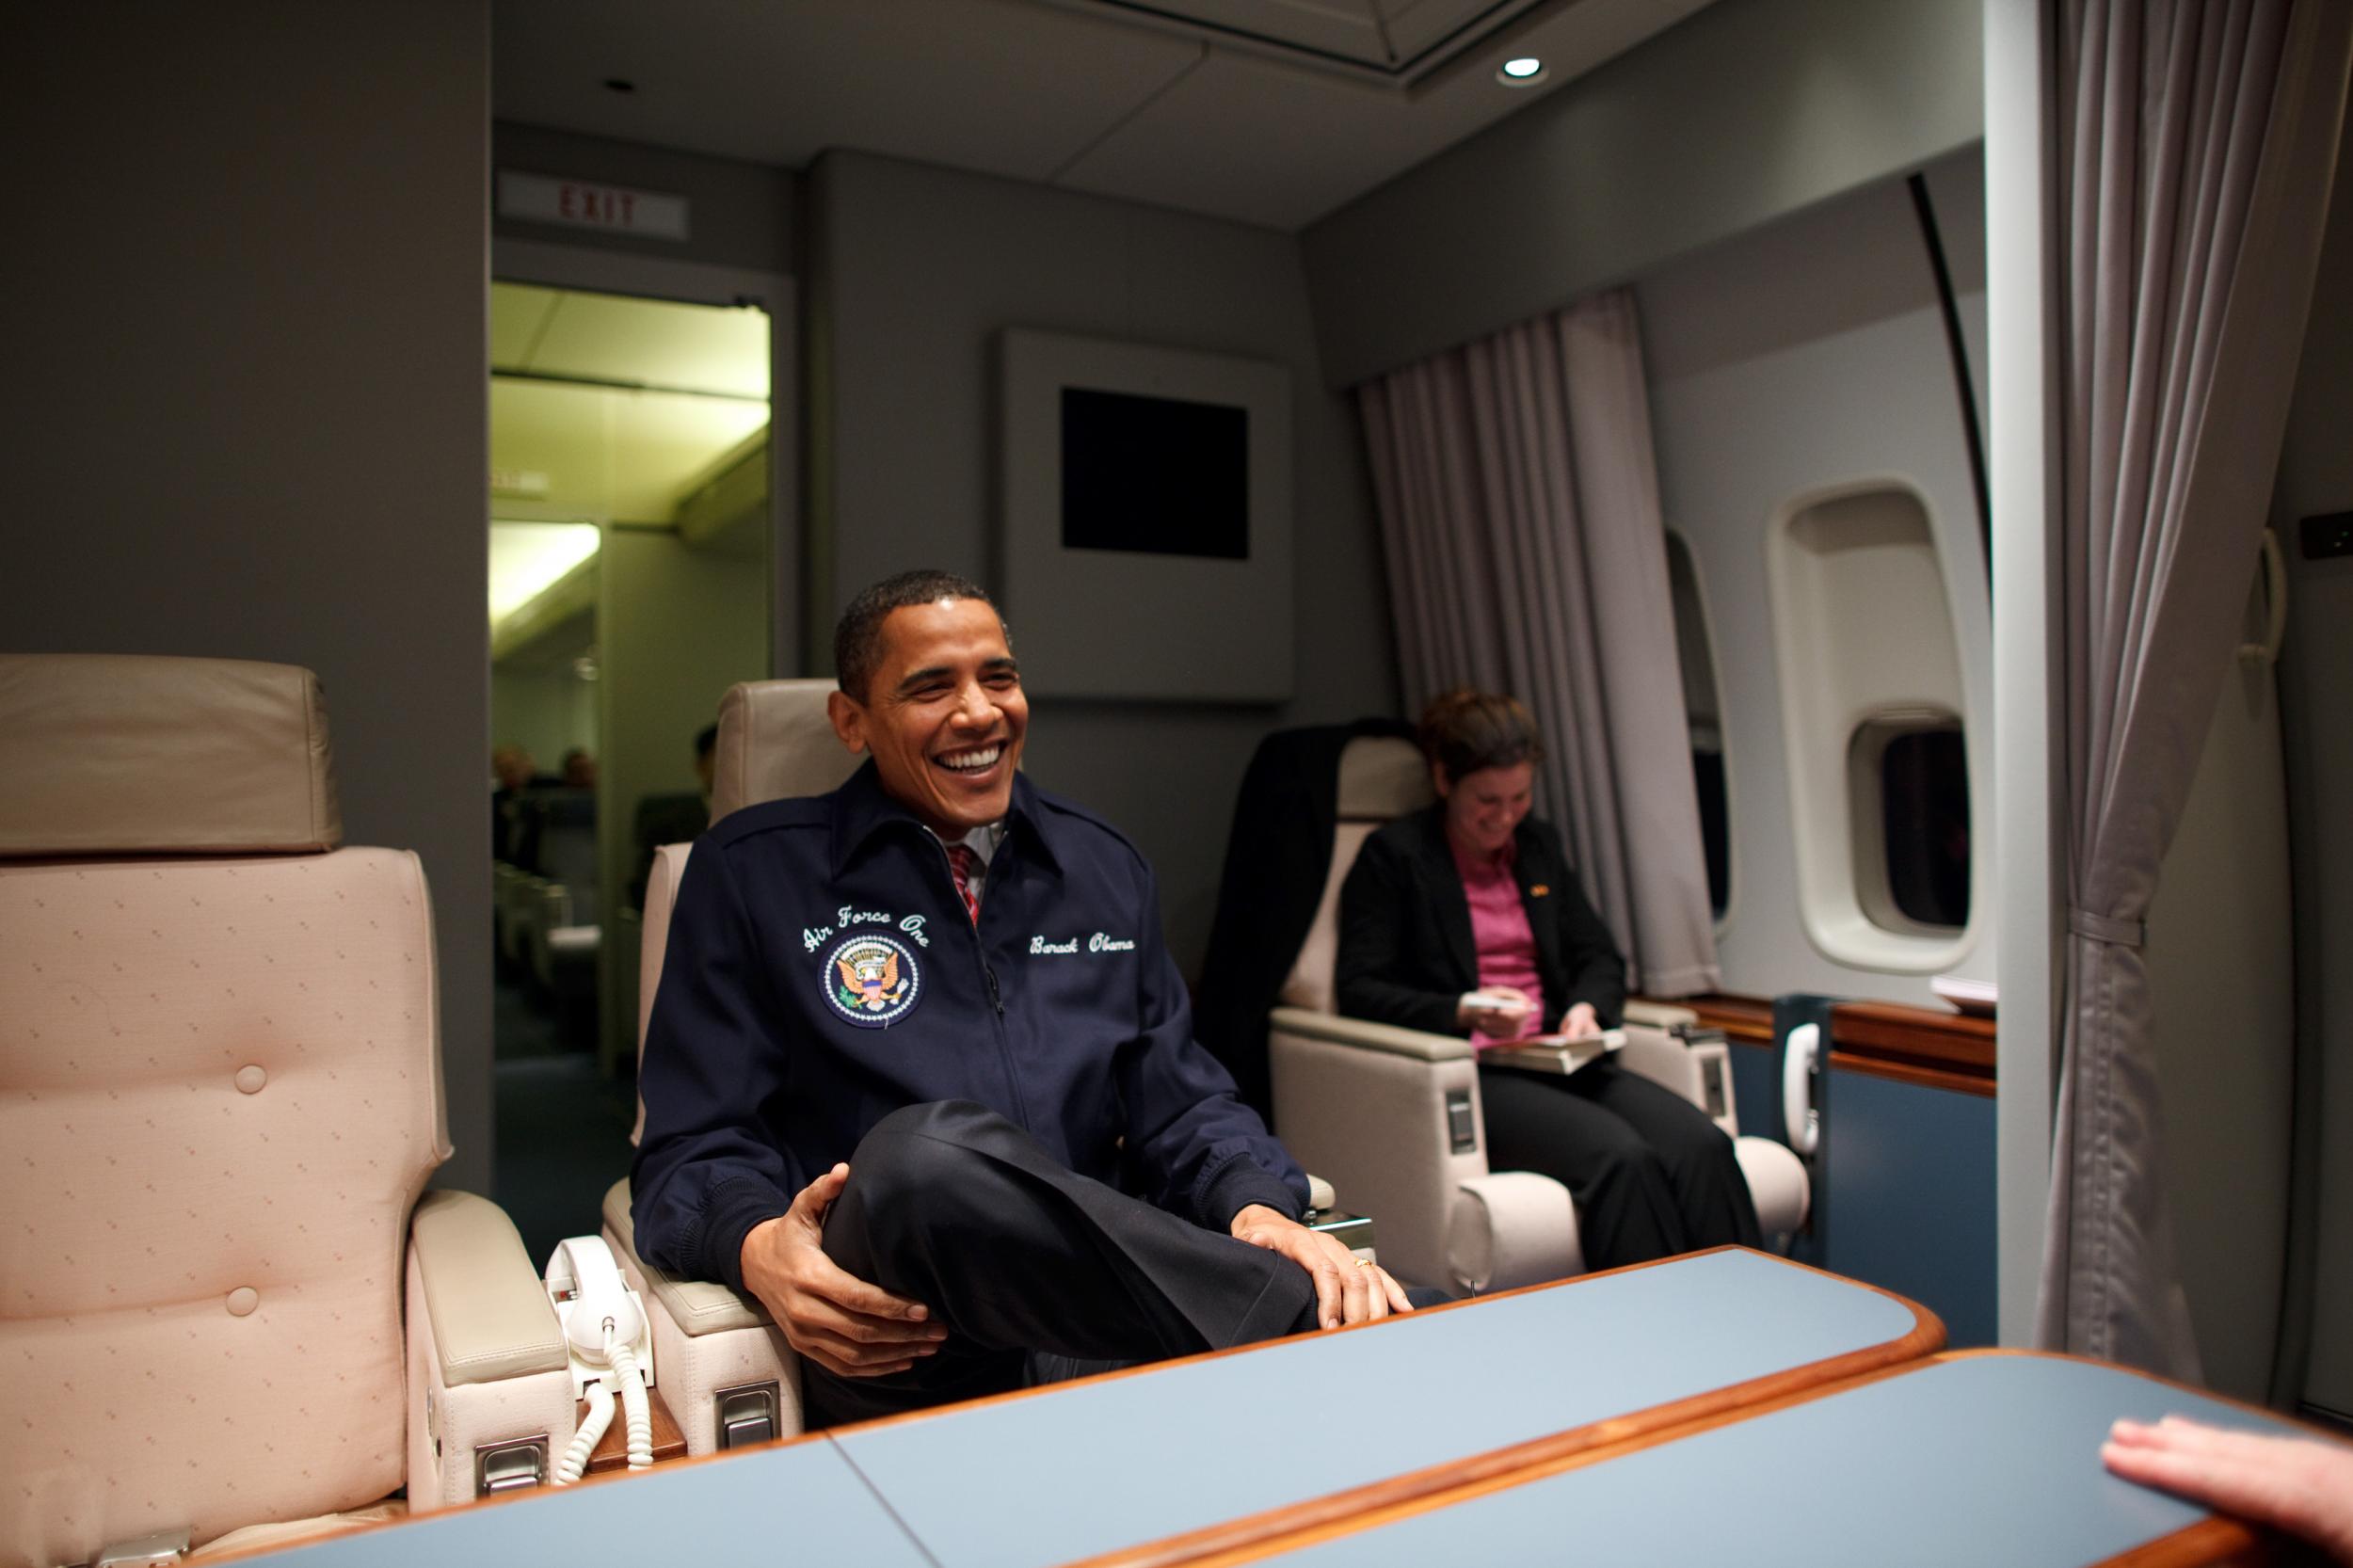 Barack Obama wearing his personalised jacket on board Air Force One.